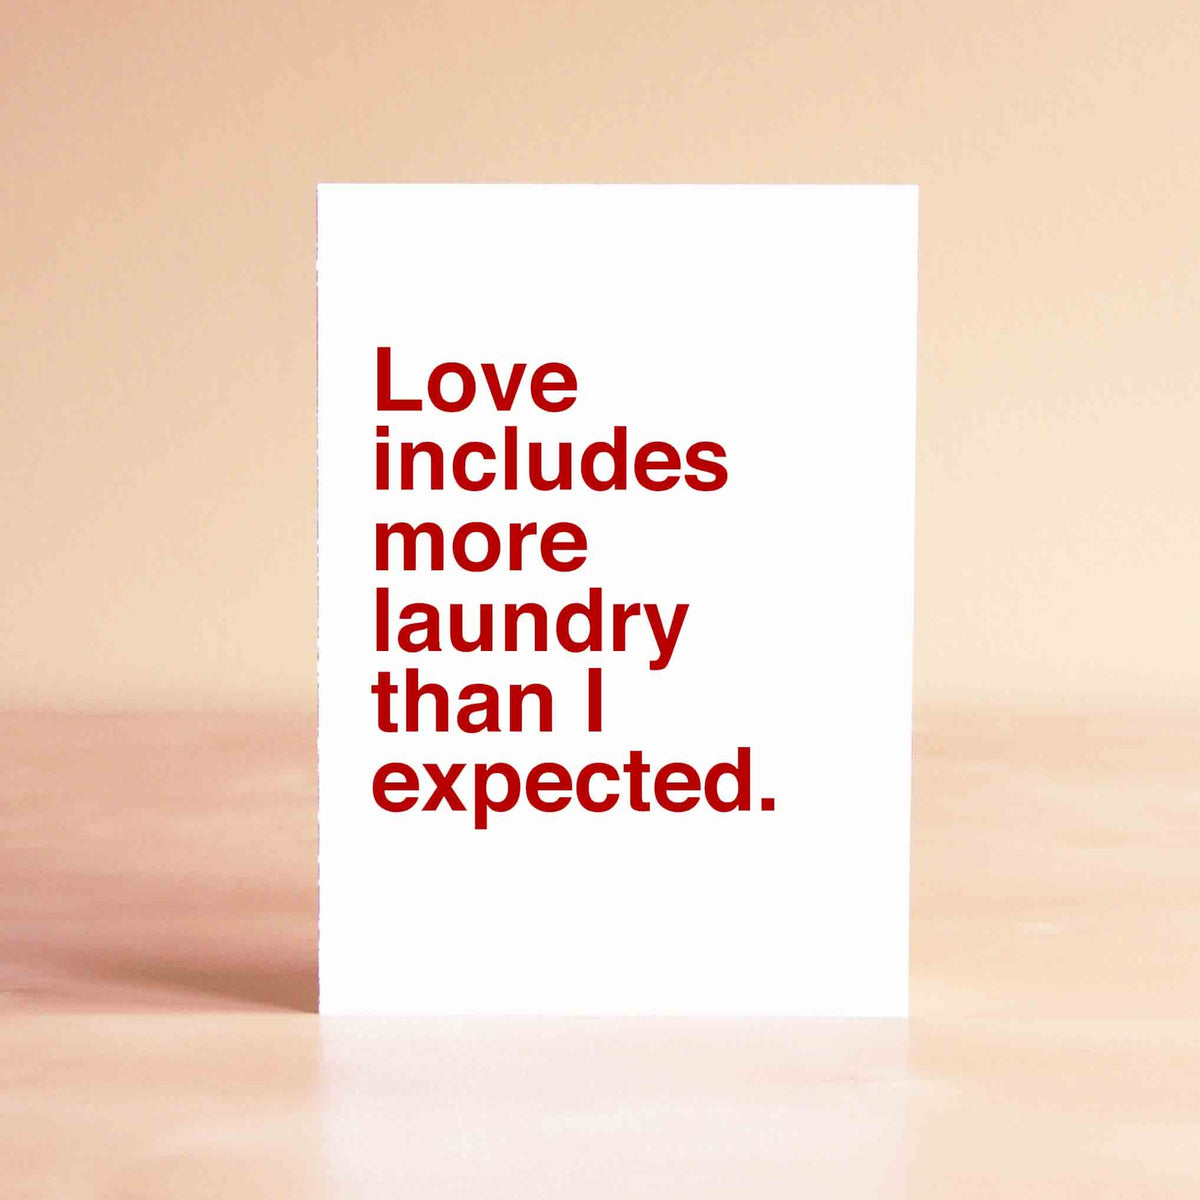 White card with red lettering reading "Love includes more laundry than I expected."